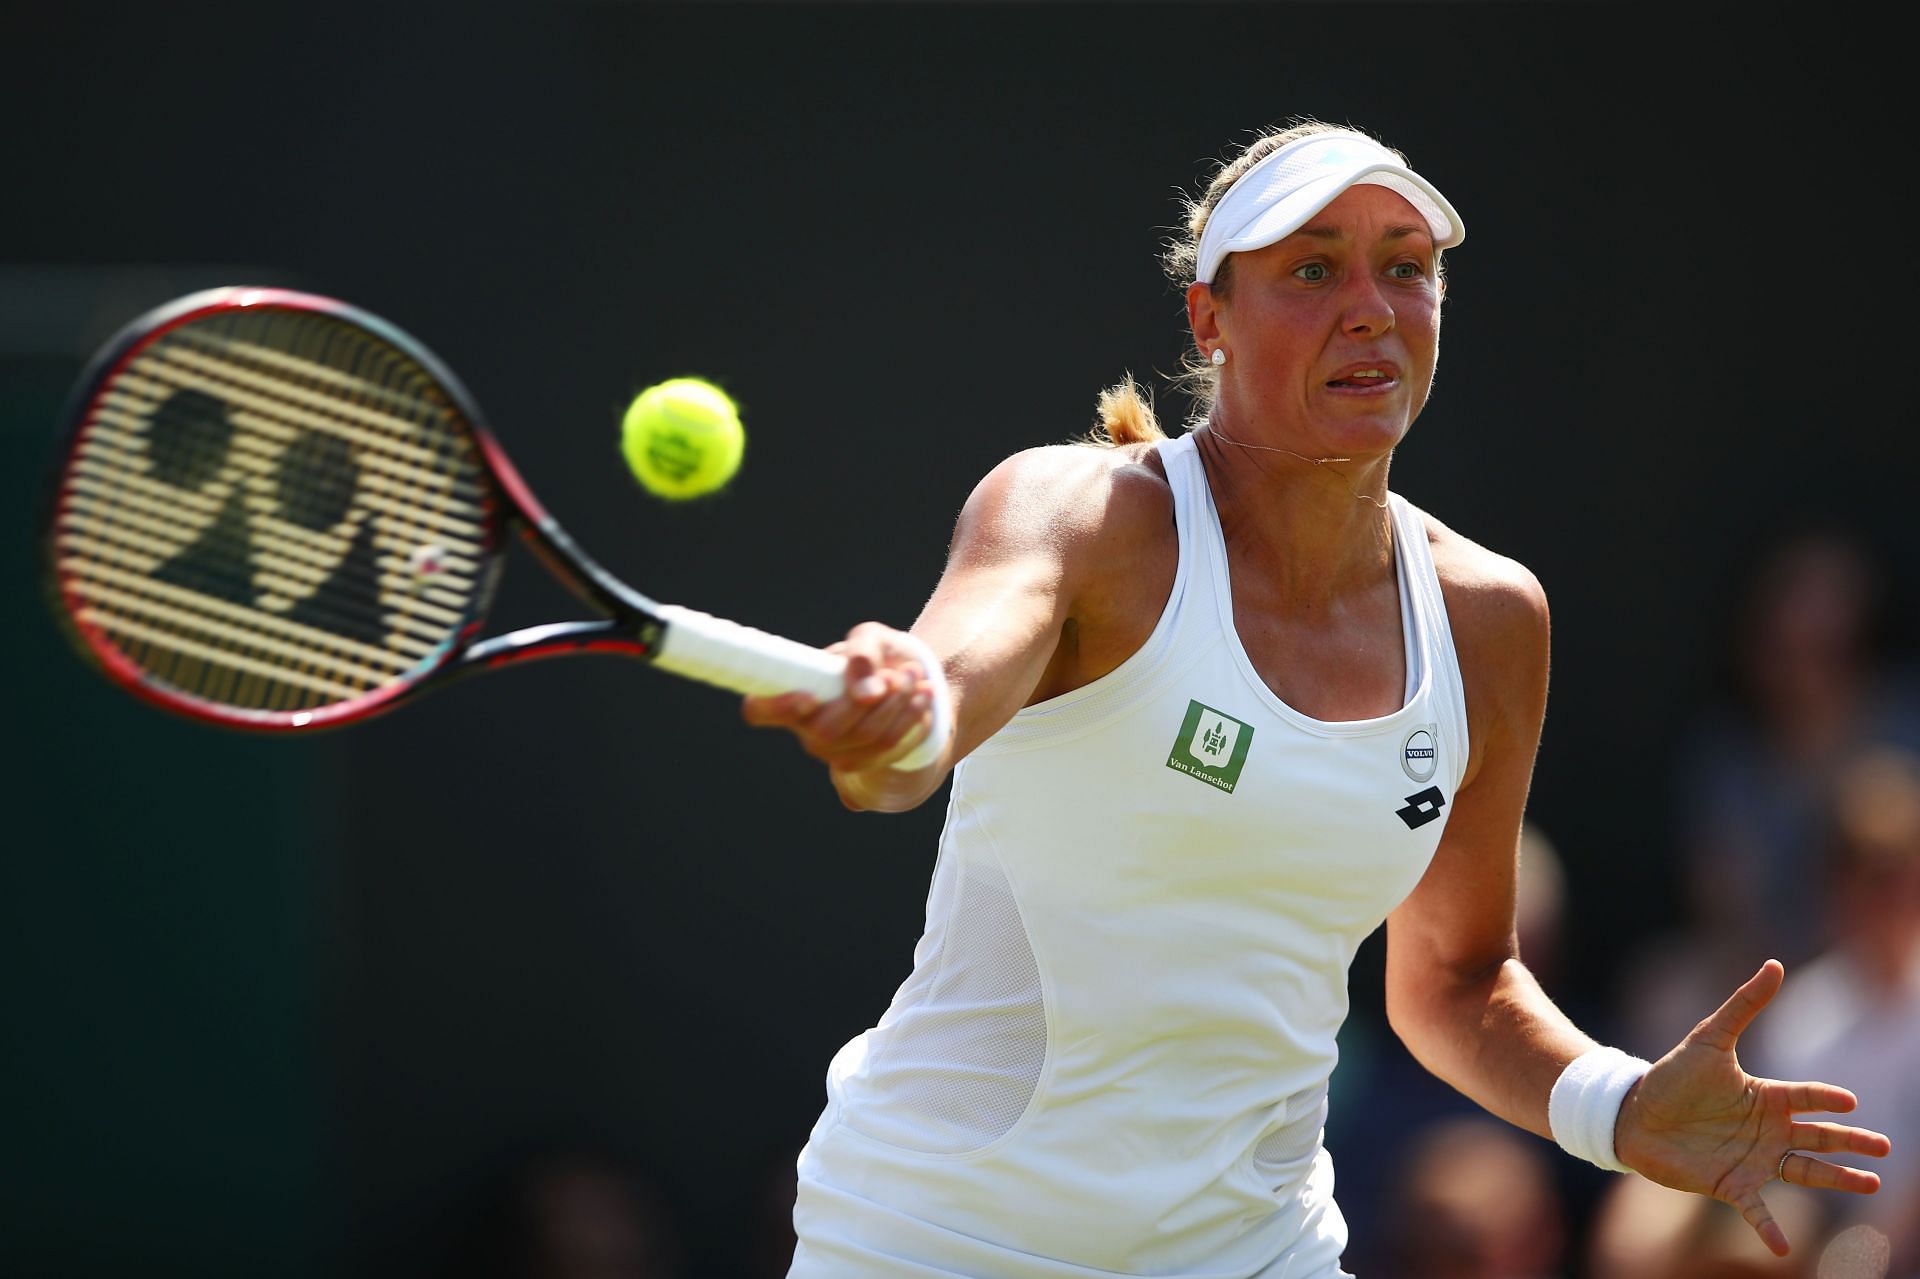 Yanina Wickmayer did not drop a set in her three qualifying matches